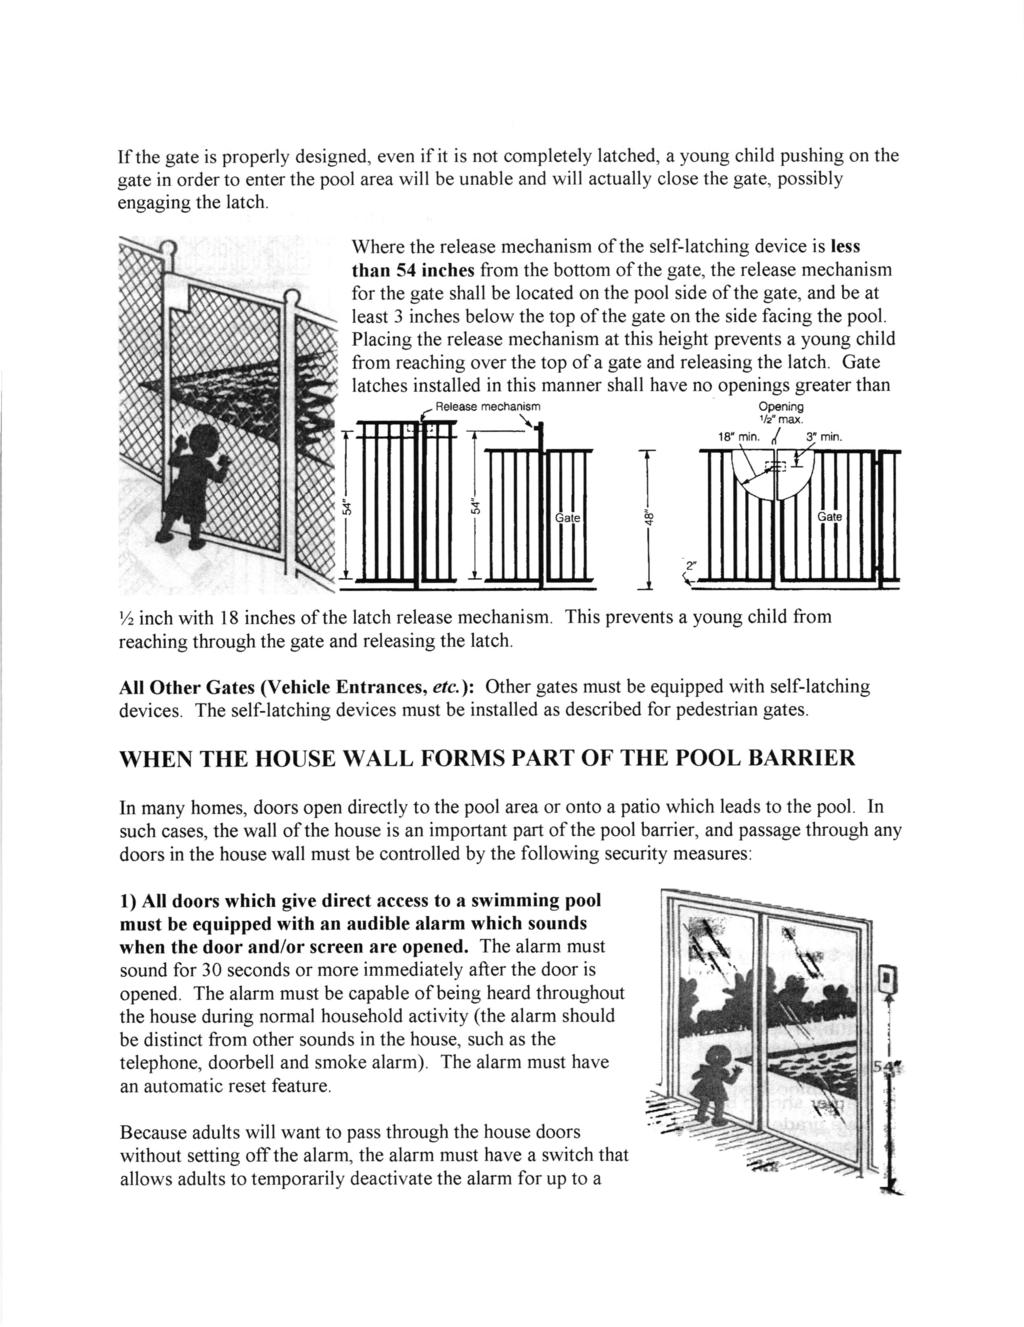 If the gate is properly designed, even if it is not completely latched, a young child pushing on the gate in order to enter the pool area will be unable and will actually close the gate, possibly